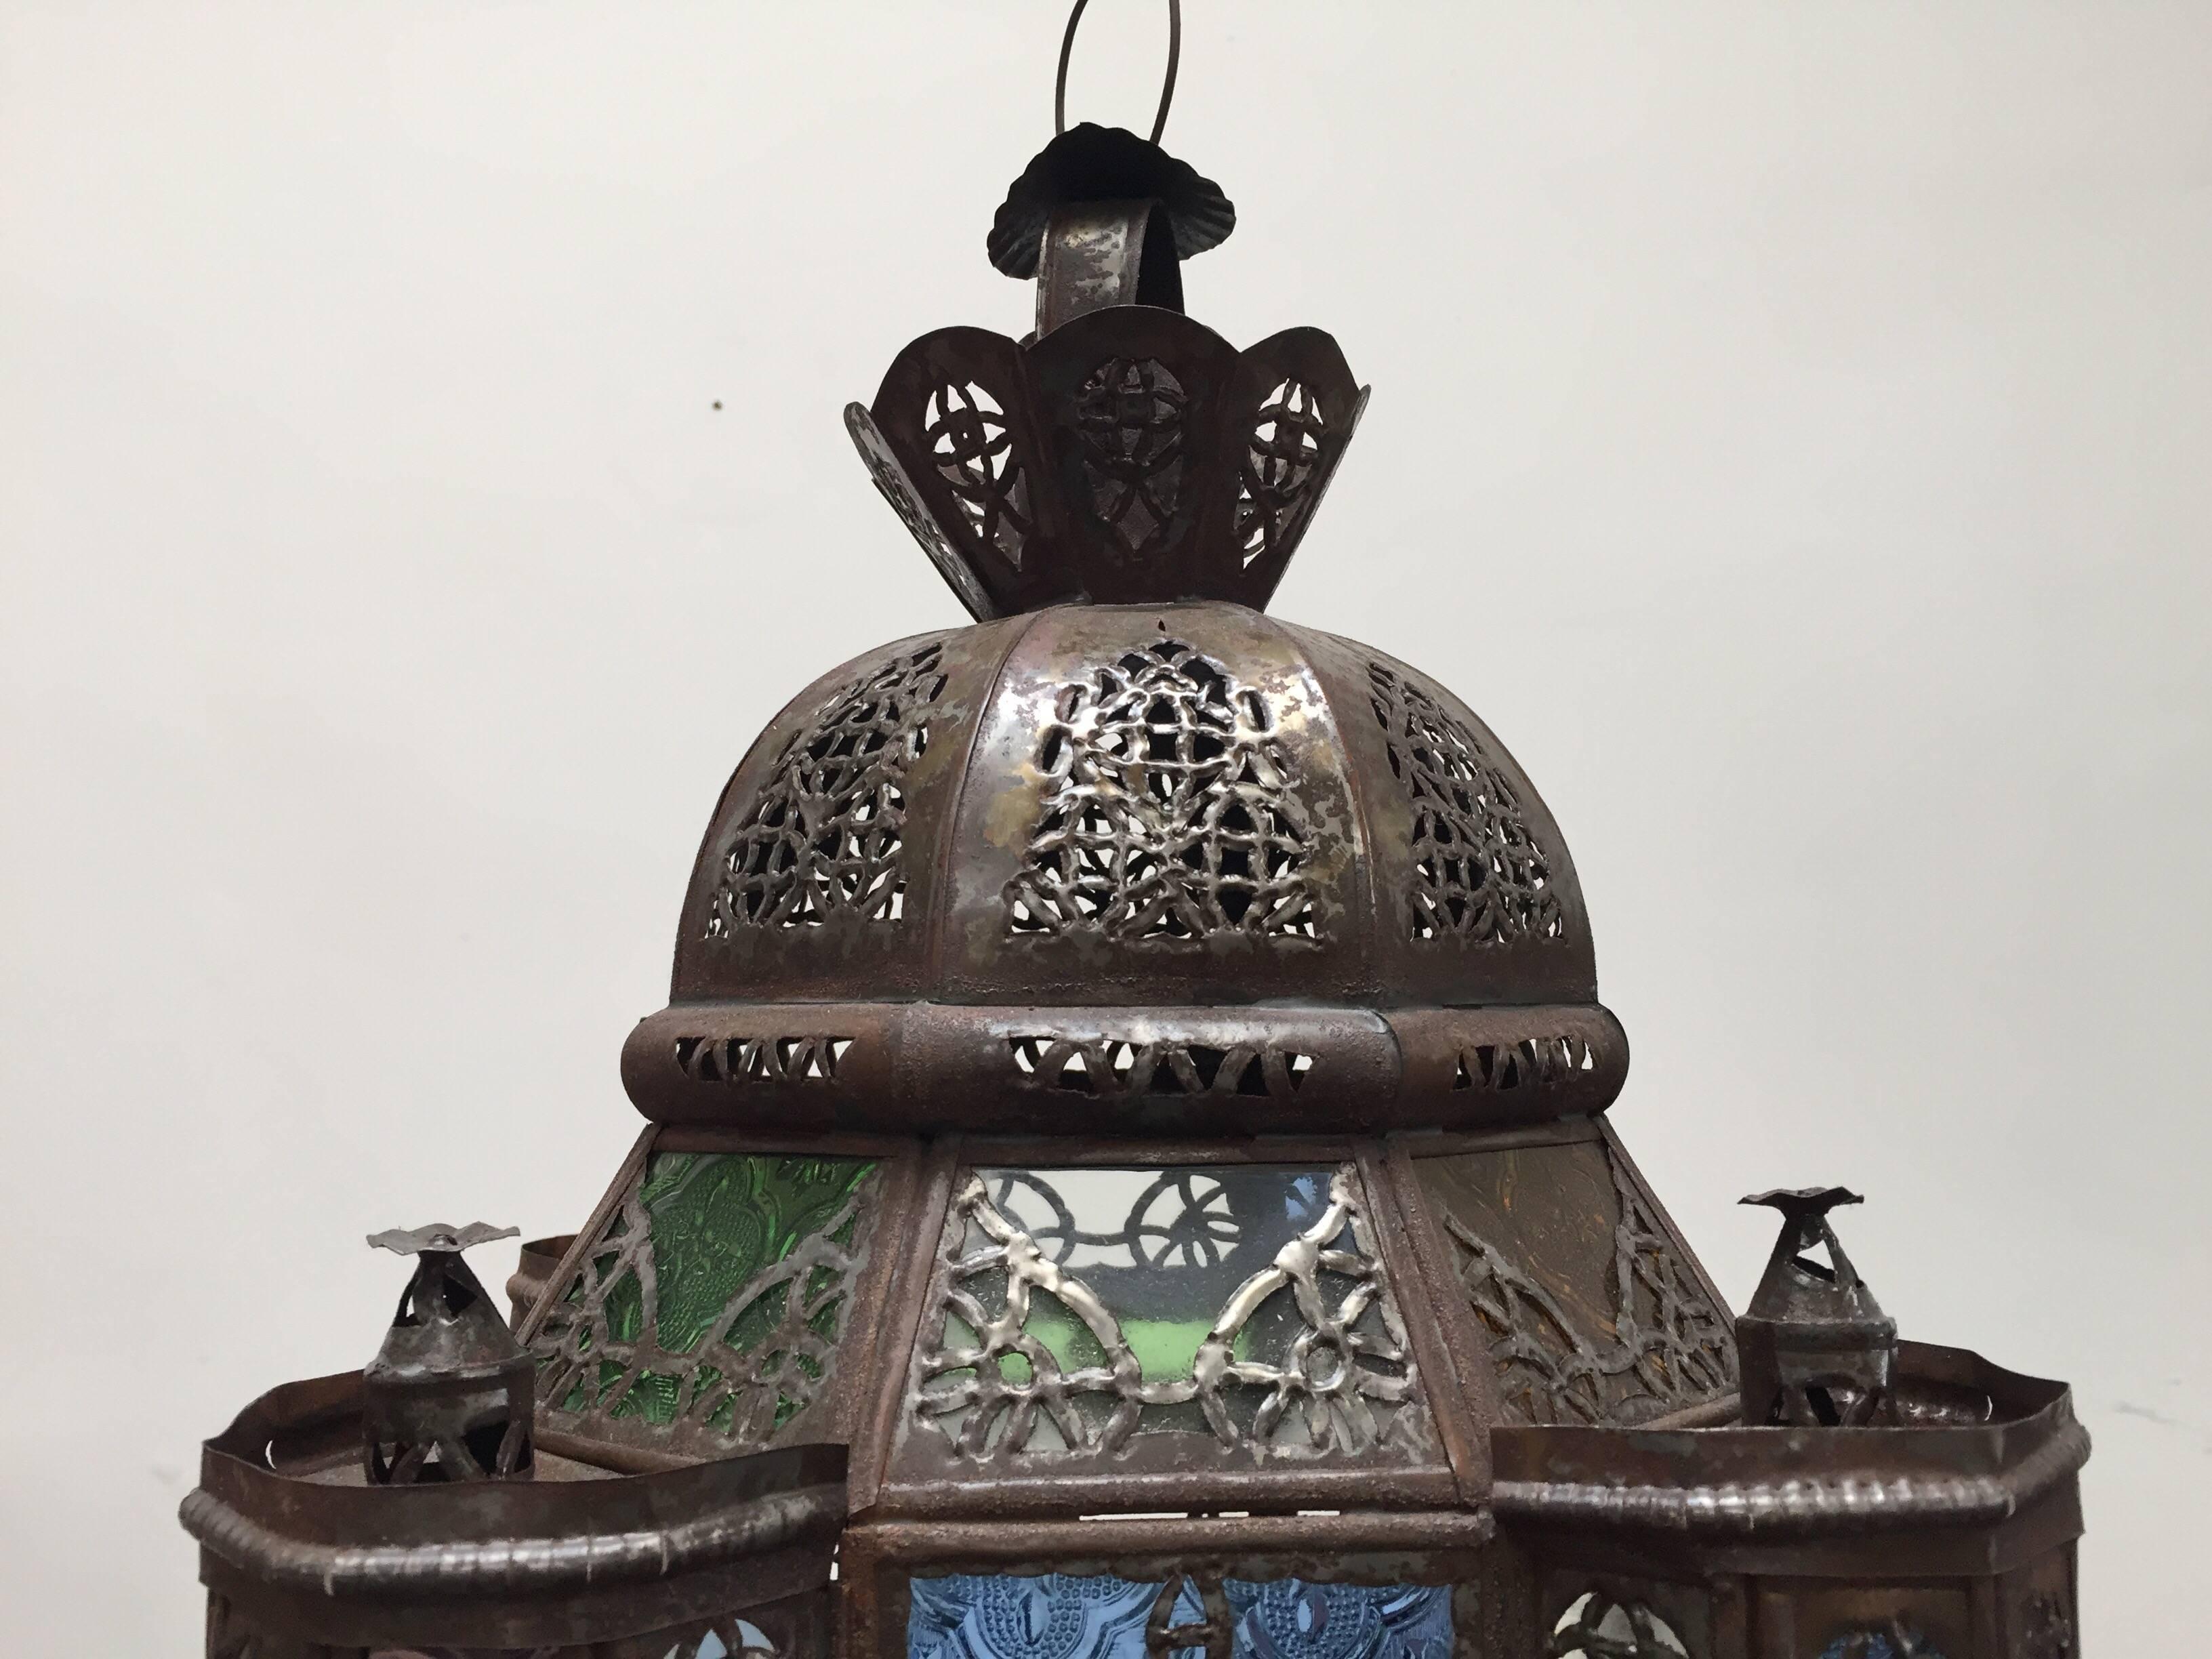 Handcrafted Moroccan glass pendant with clear and colored glass, square shape with towers and a dome with metal filigree.
This multi-color Moroccan glass lantern with Moorish arches in metal filigree and colored glass in green, blue, lavender and